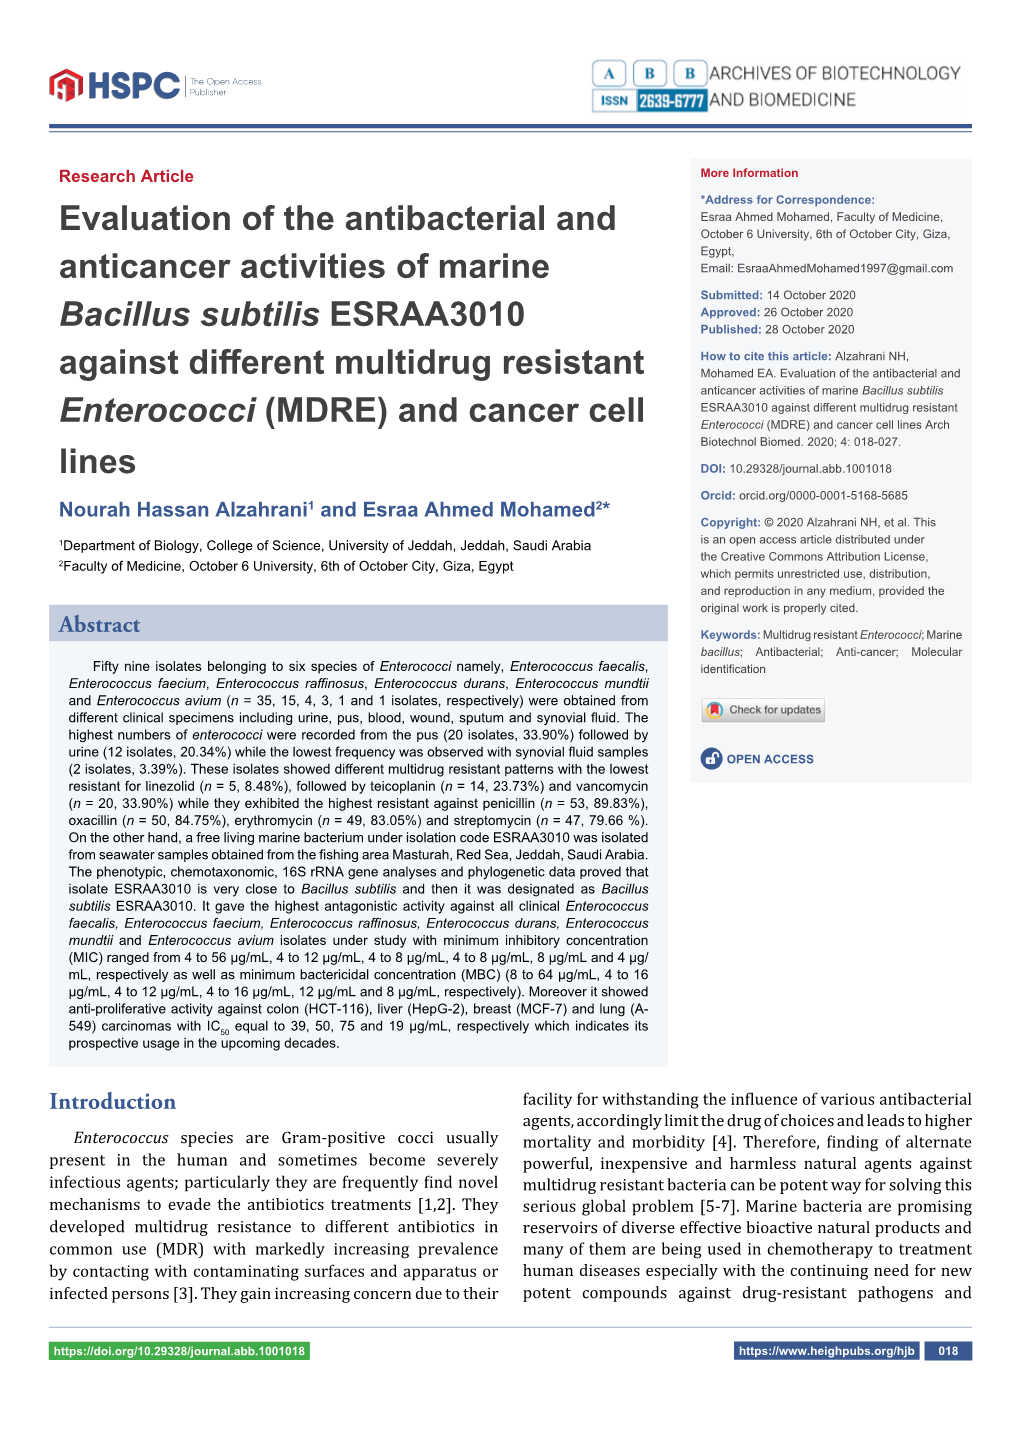 Evaluation of the Antibacterial and Anticancer Activities of Marine